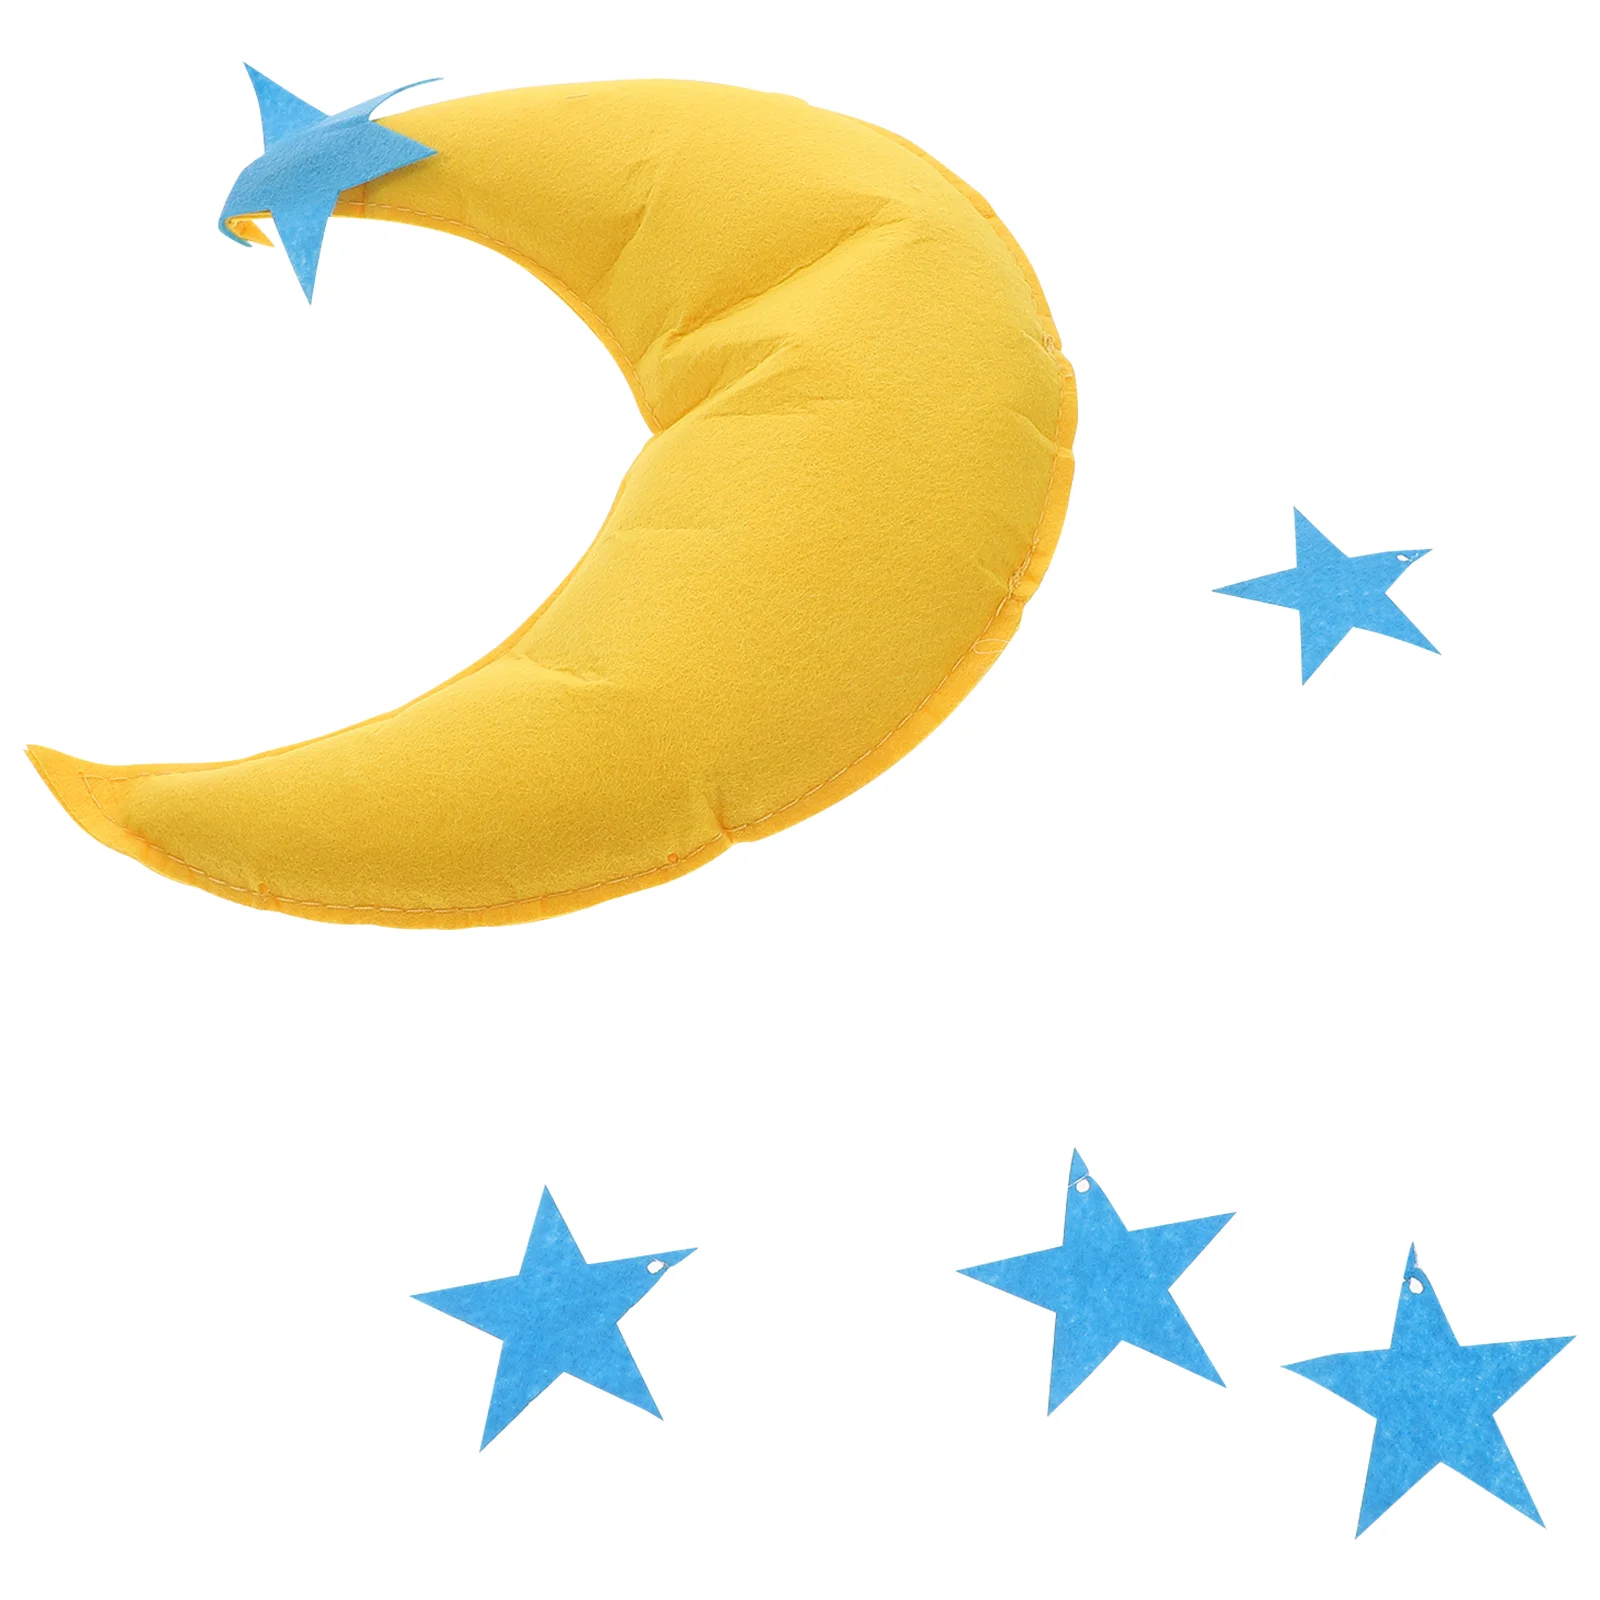 

Hanging Star Baby Decor Crib Nursery Pendant Decoration Mobile Ceiling Moon Wall Felt Room 3D Decorations Hangings Party Cloud